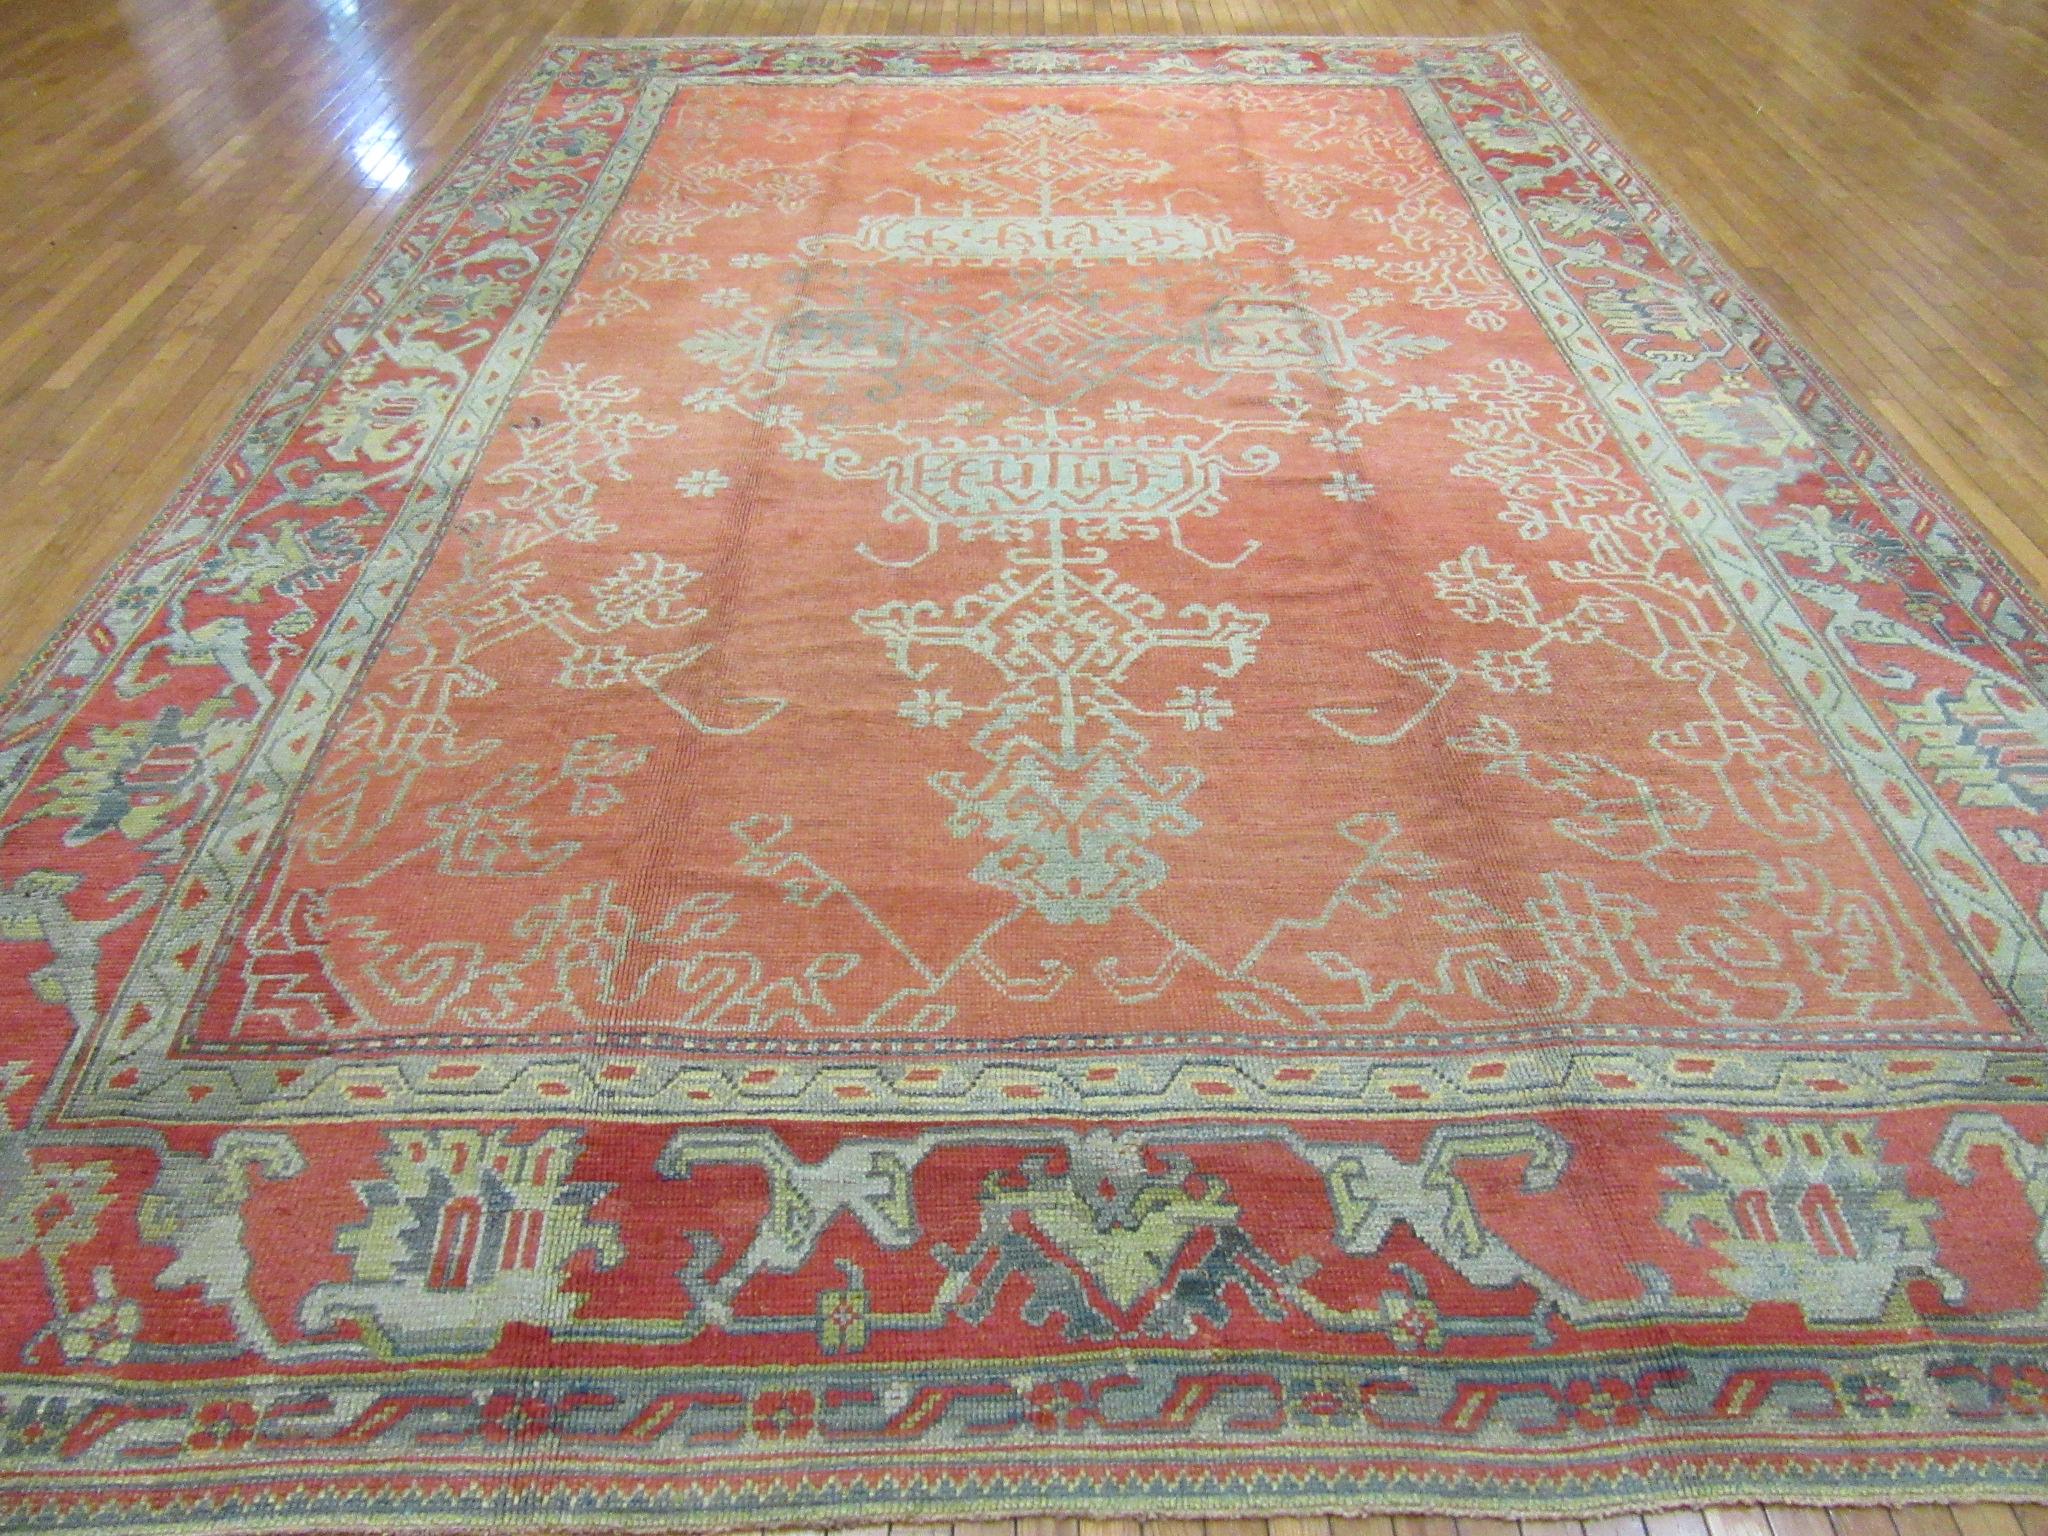 This is a large room size hand-knotted antique Turkish Oushak rug which measures 10' 8'' x 15' 2'' made with all wool and natural dyes. The rug is in very good condition.